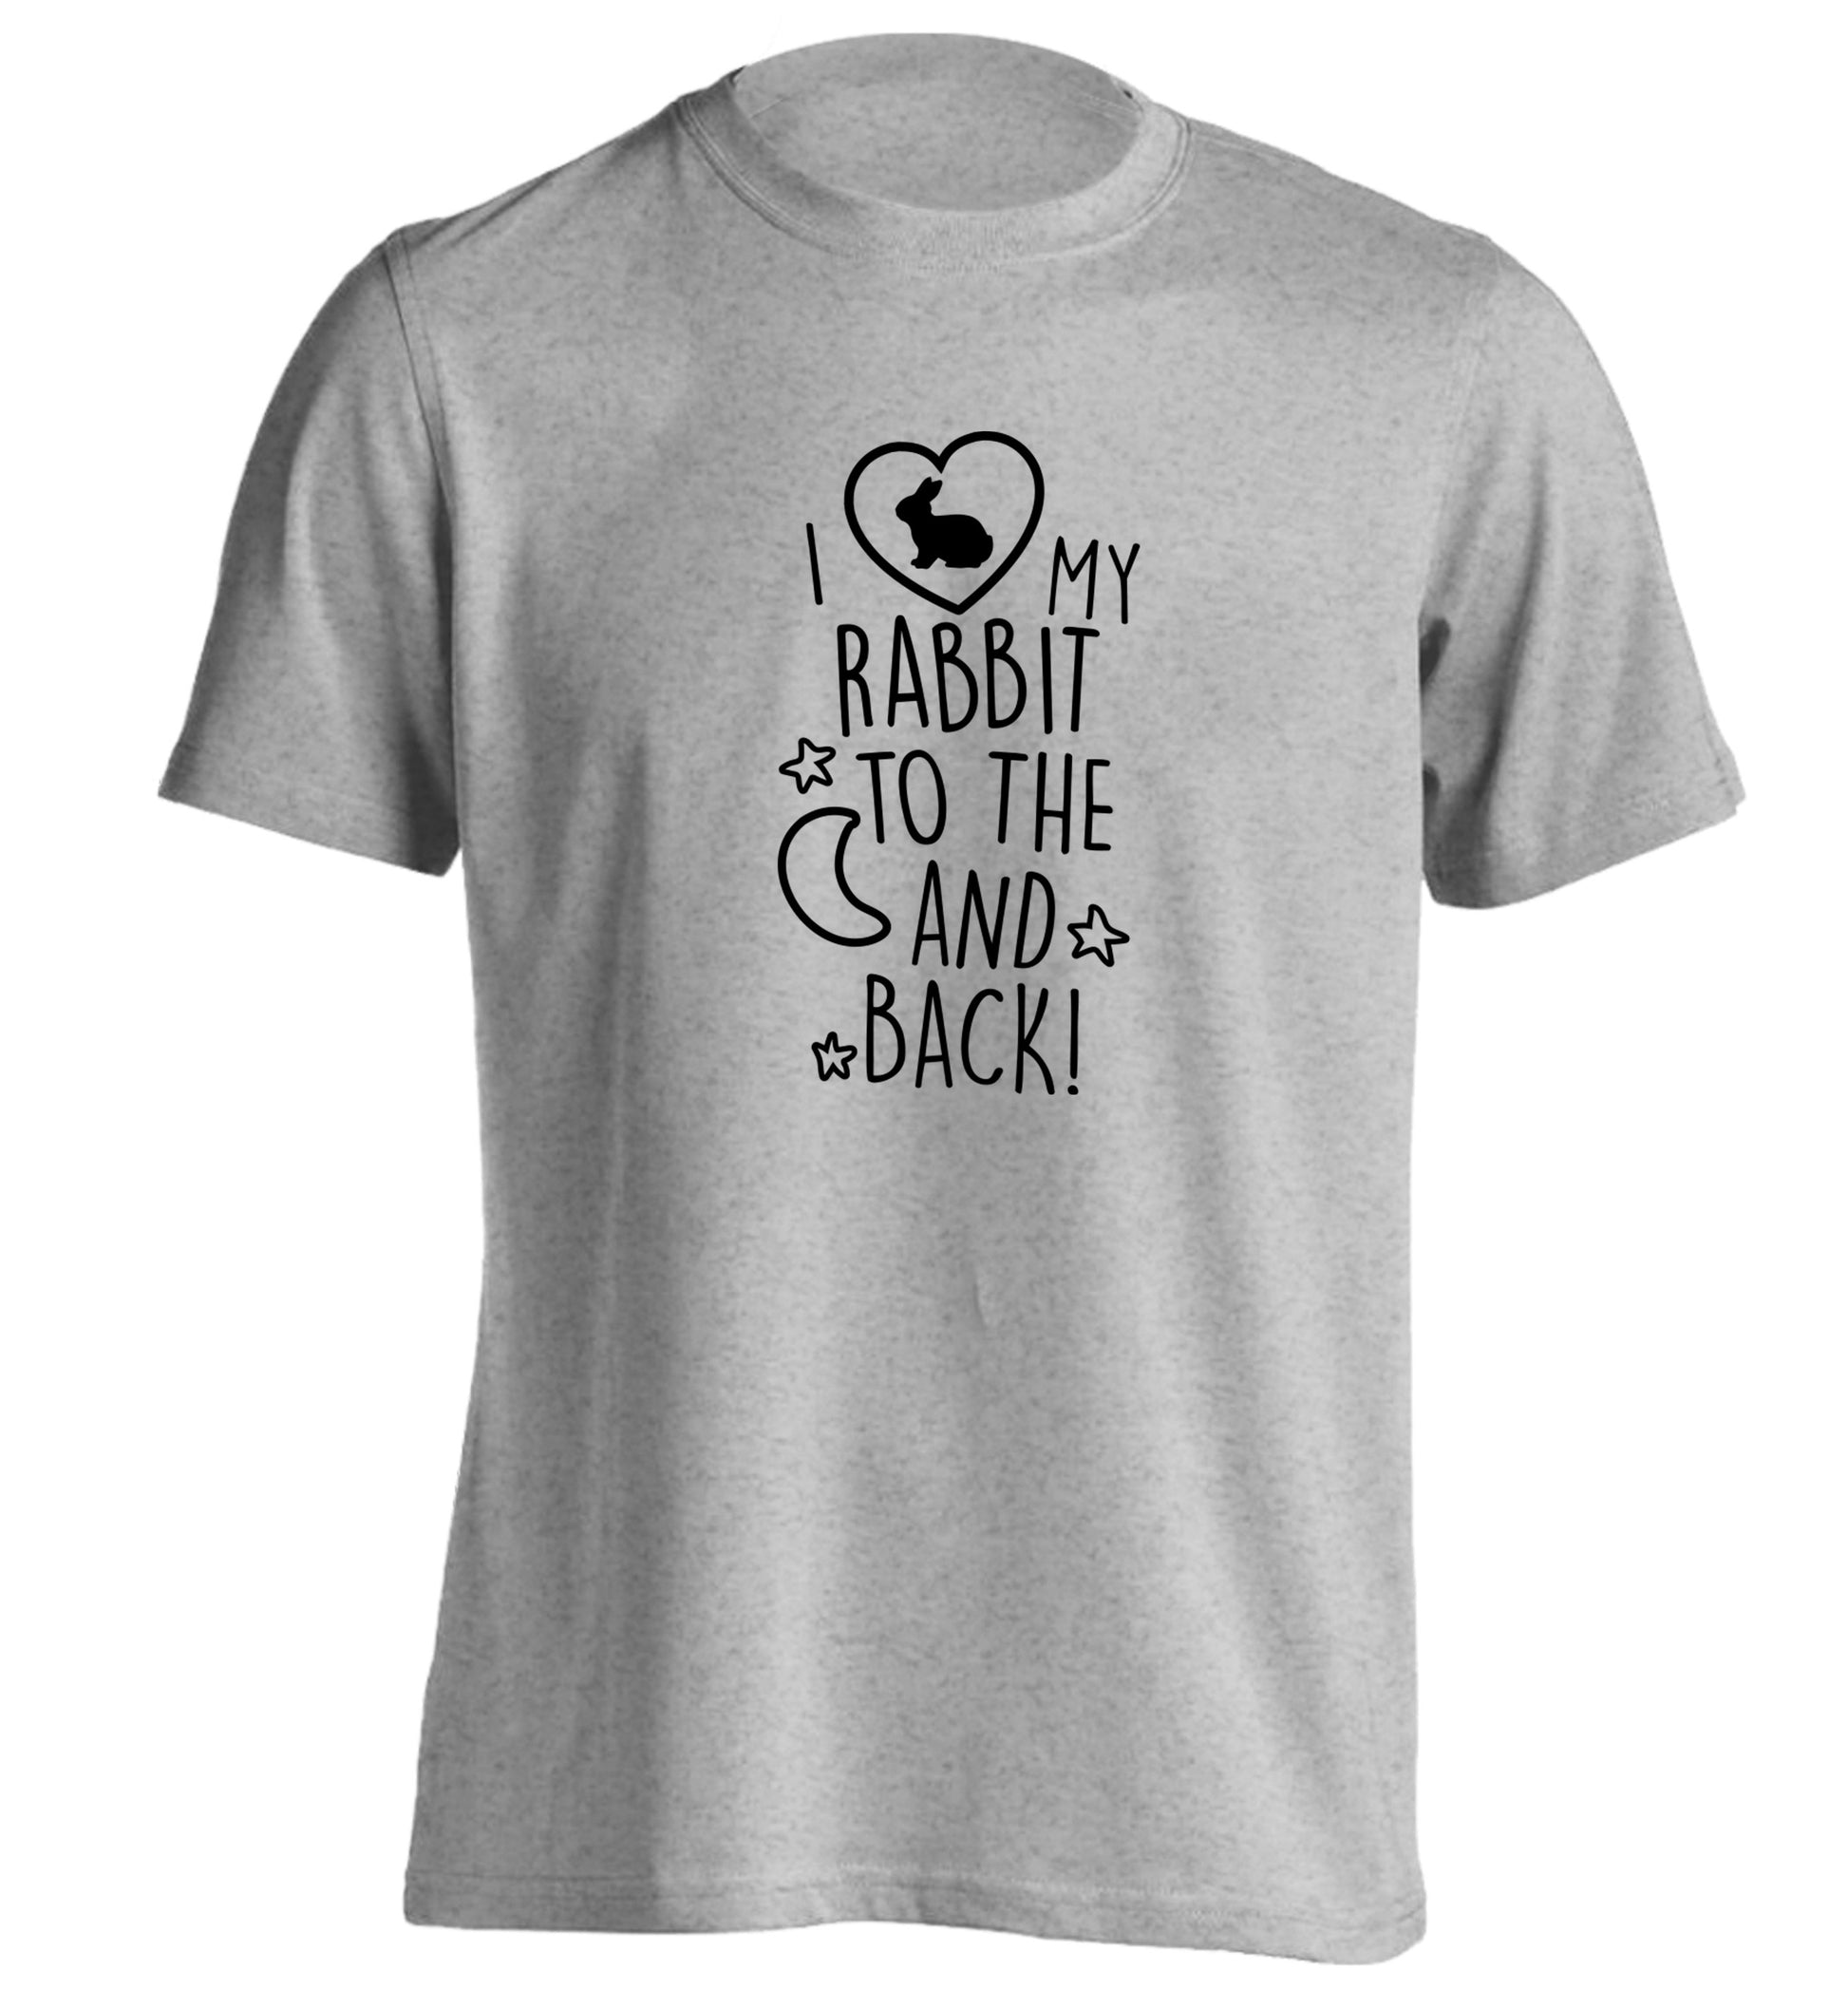 I love my rabbit to the moon and back adults unisex grey Tshirt 2XL